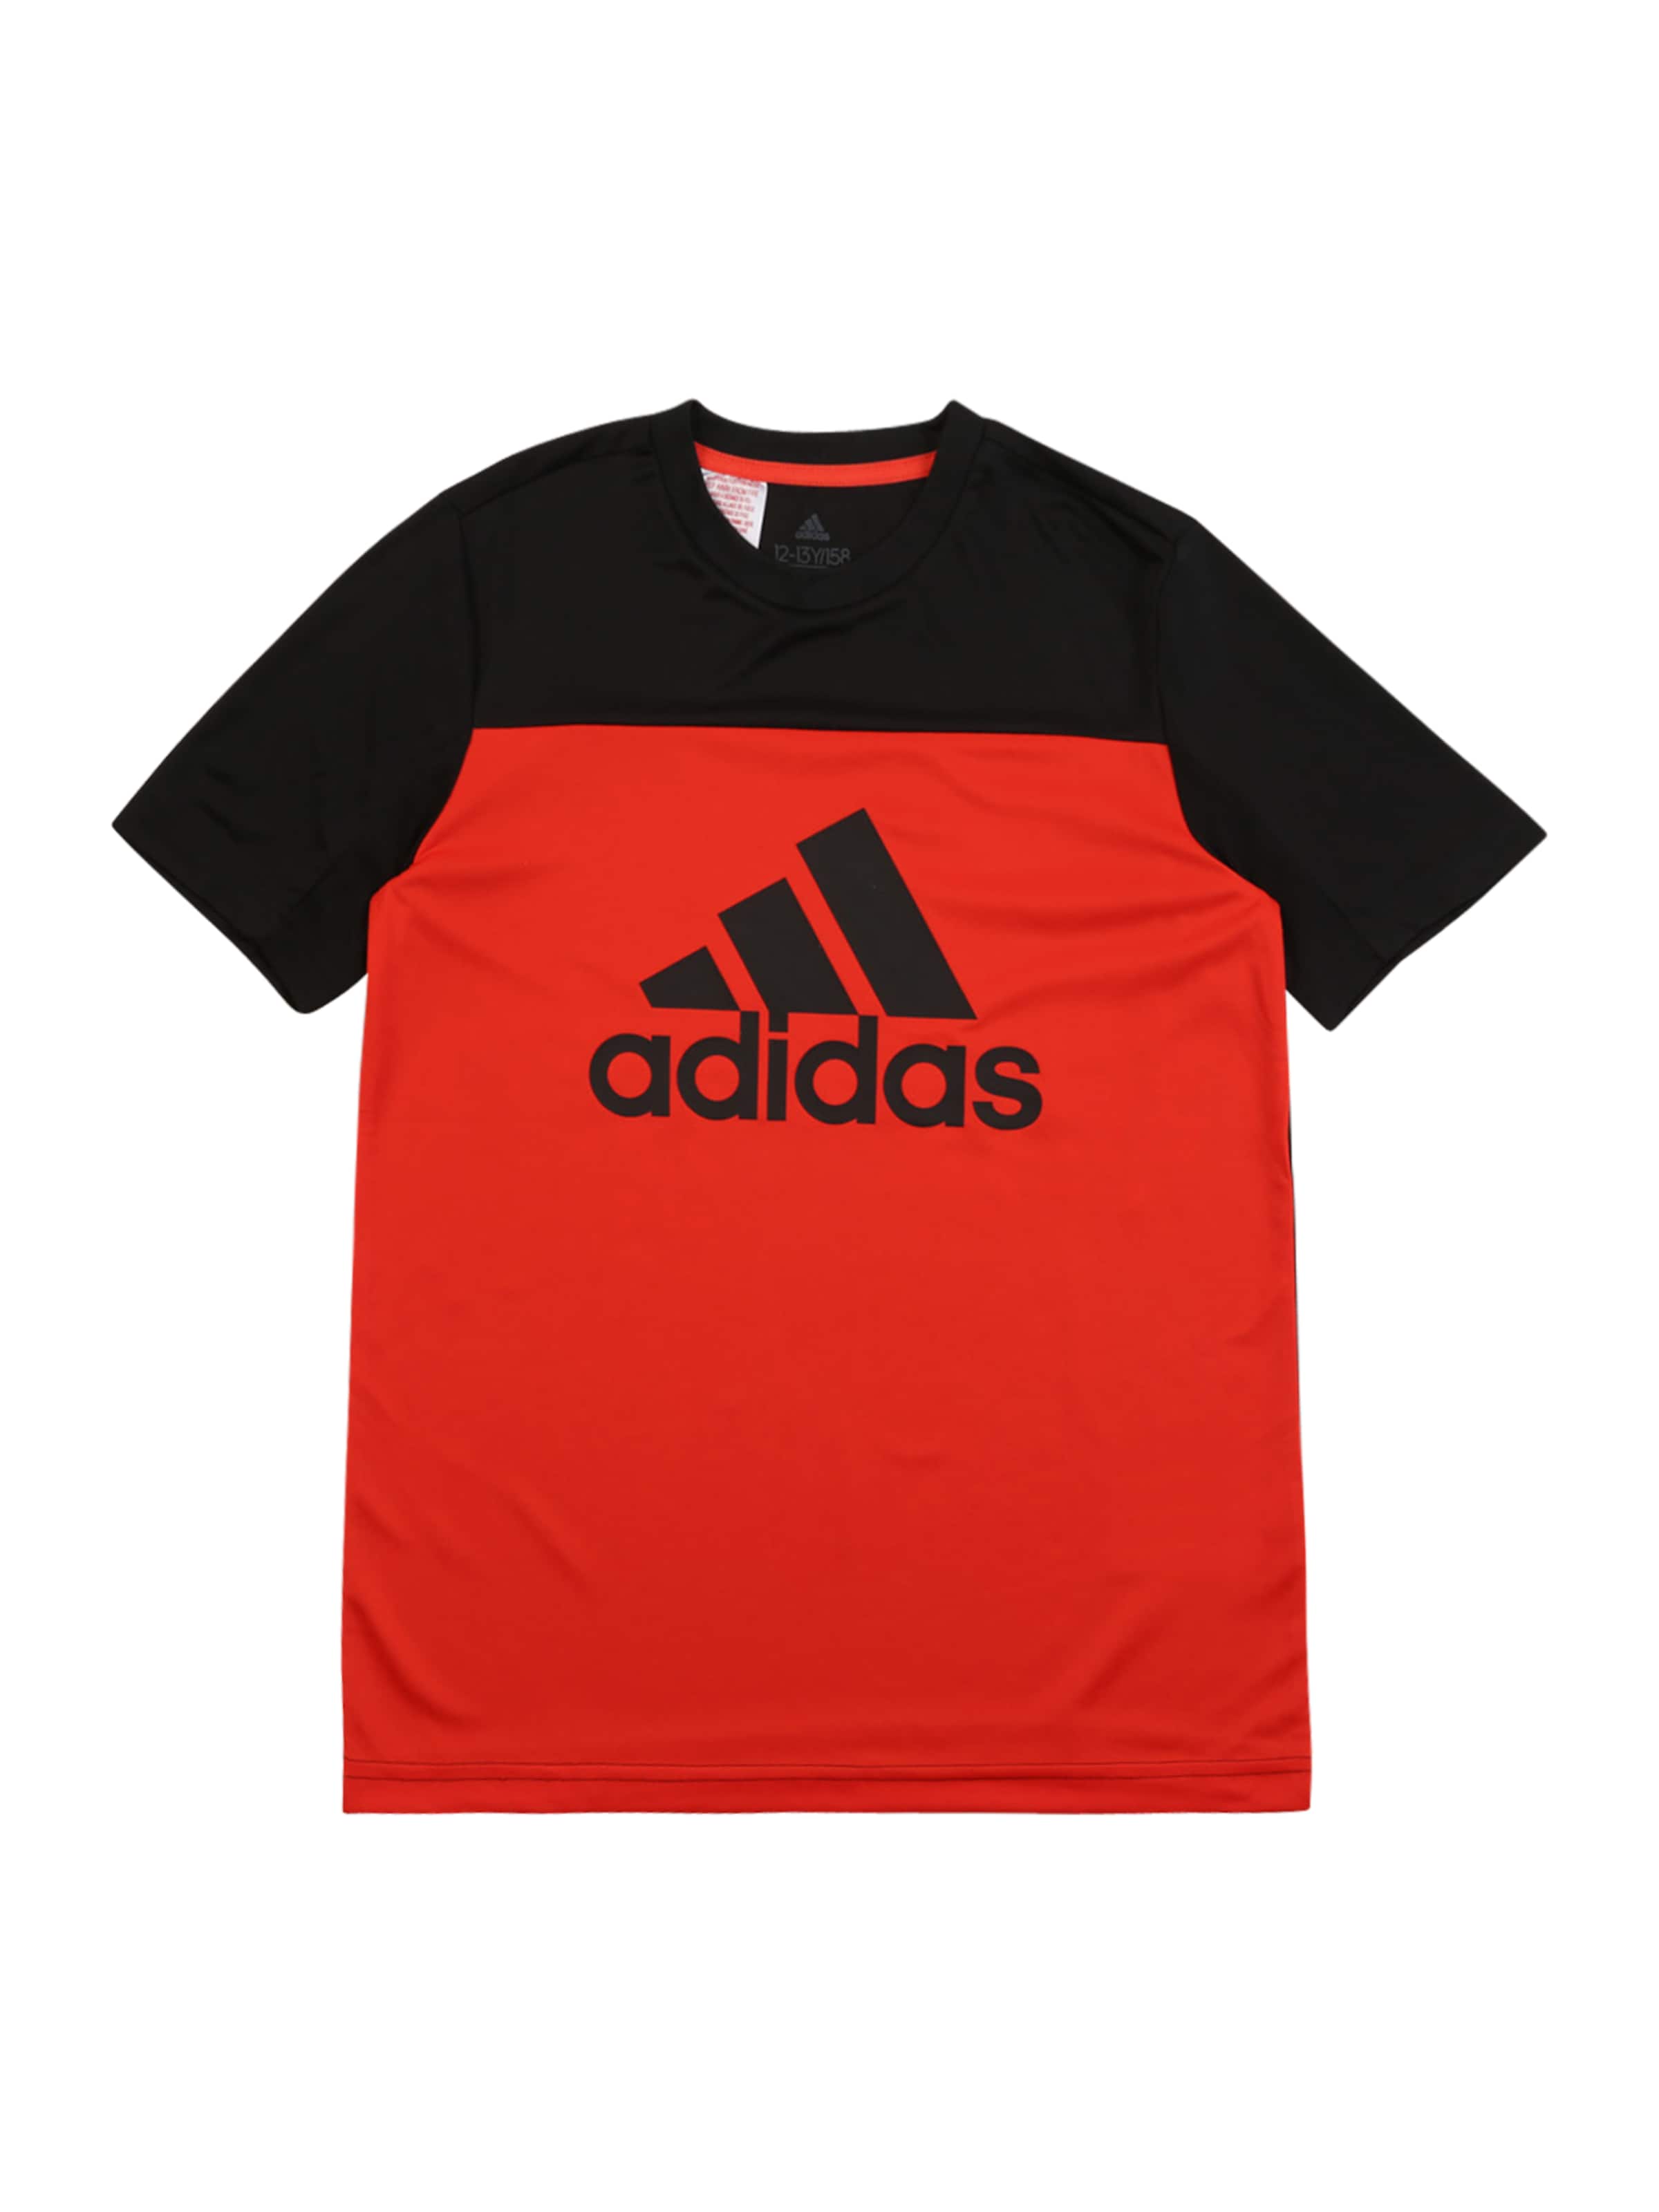 ADIDAS PERFORMANCE Functional shirt in 